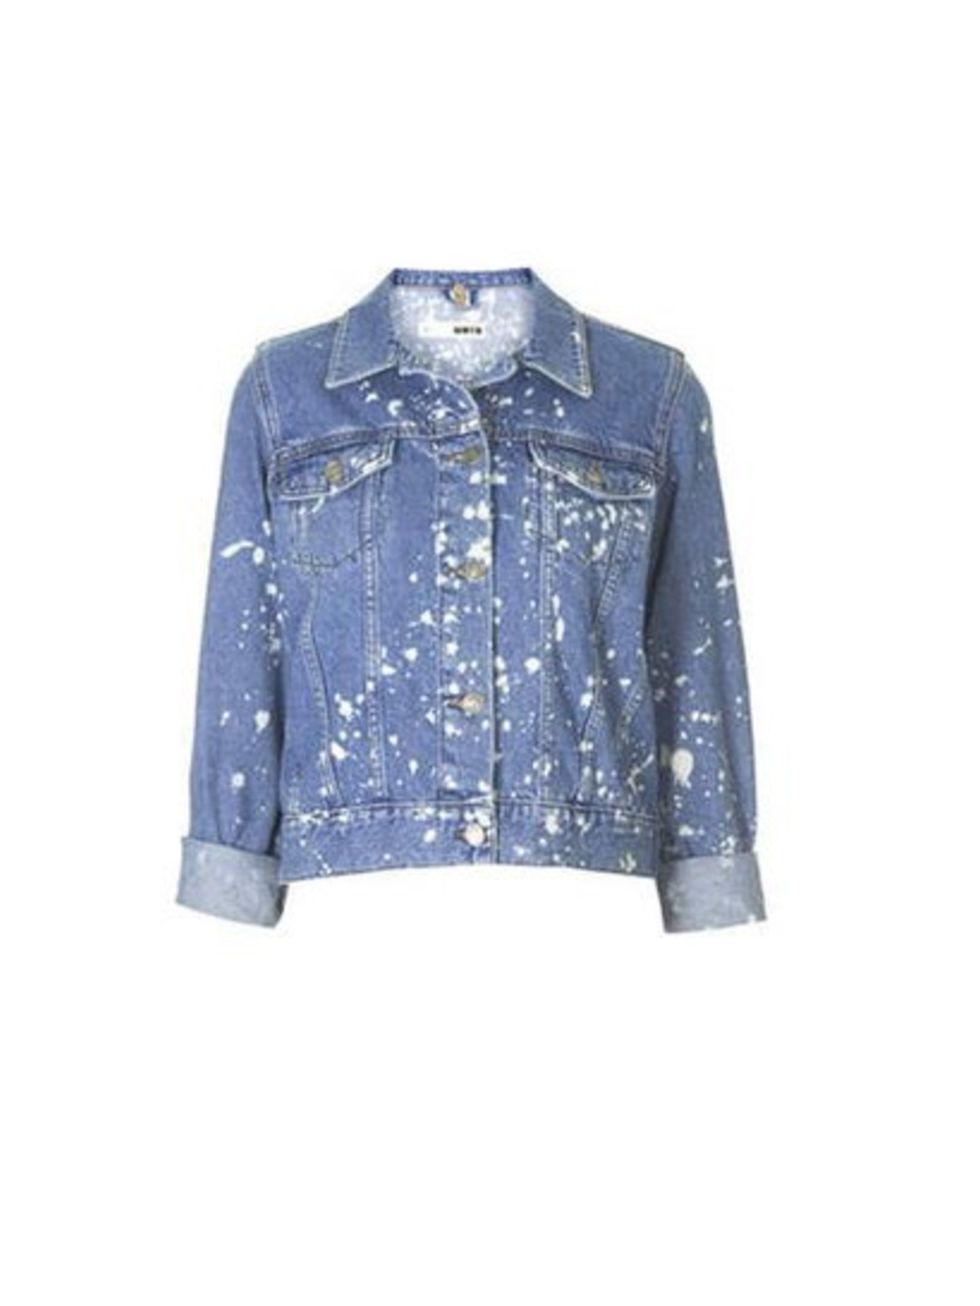 Brighten up you outfit with denim

Moto Bleached denim jacket, £48 available at Topshop